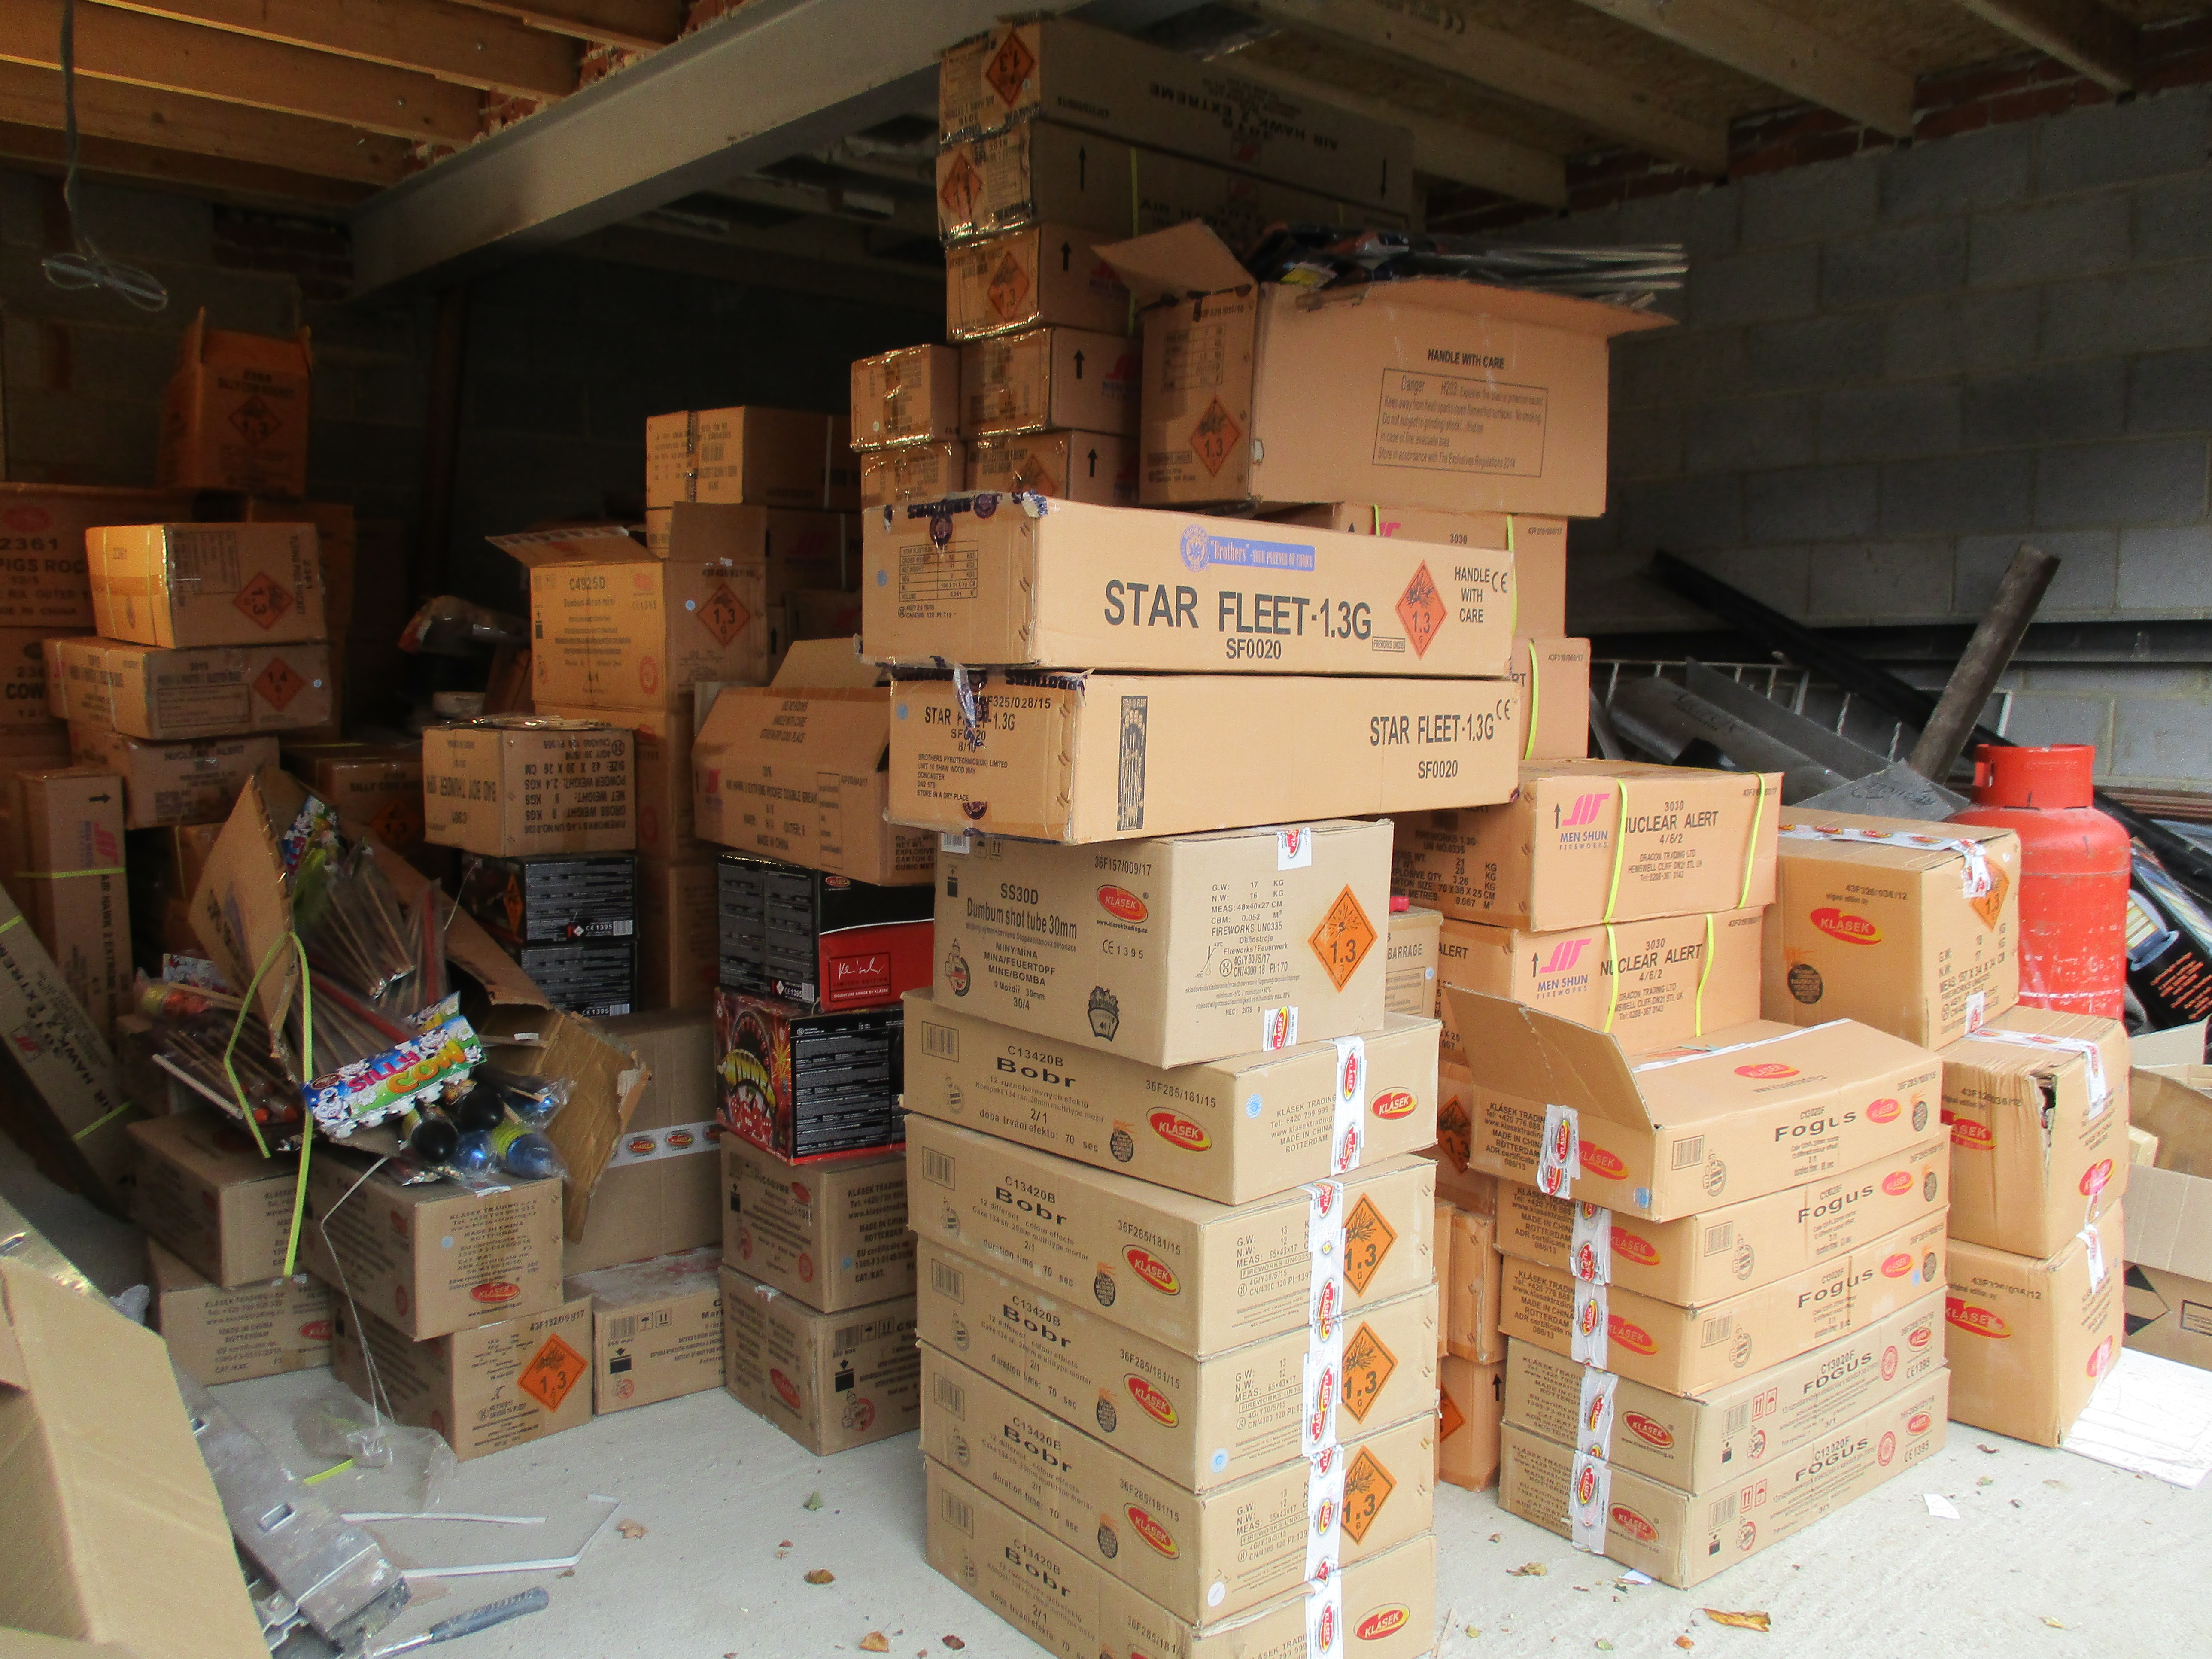 Piles of fireworks boxes in a garage